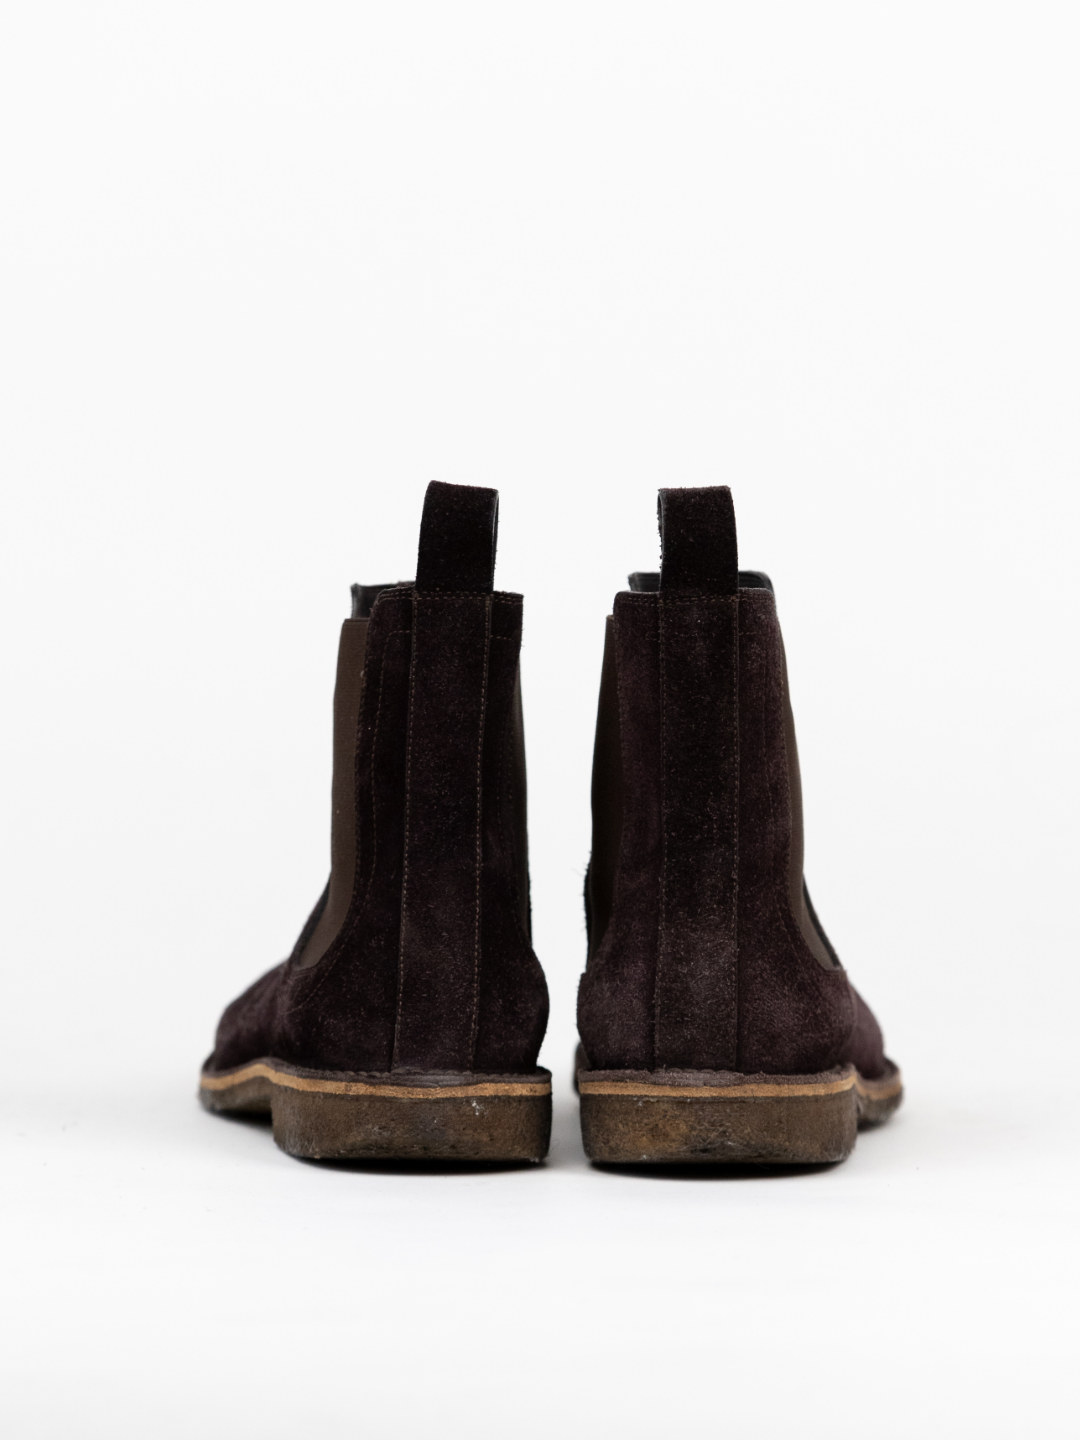 Brown Suede Chelsea Boot